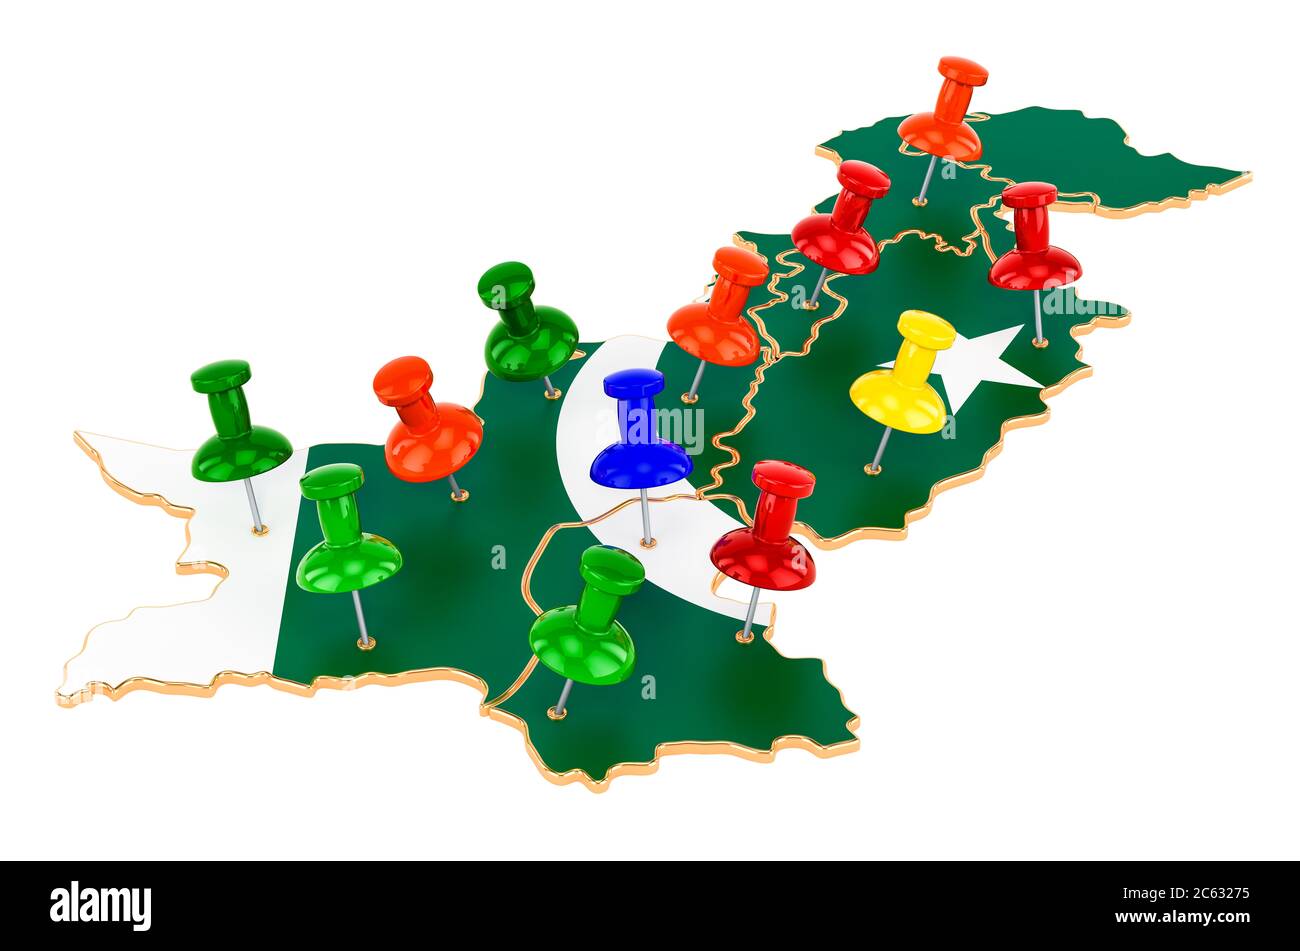 Map of Pakistan with colored push pins, 3D rendering isolated on white background Stock Photo